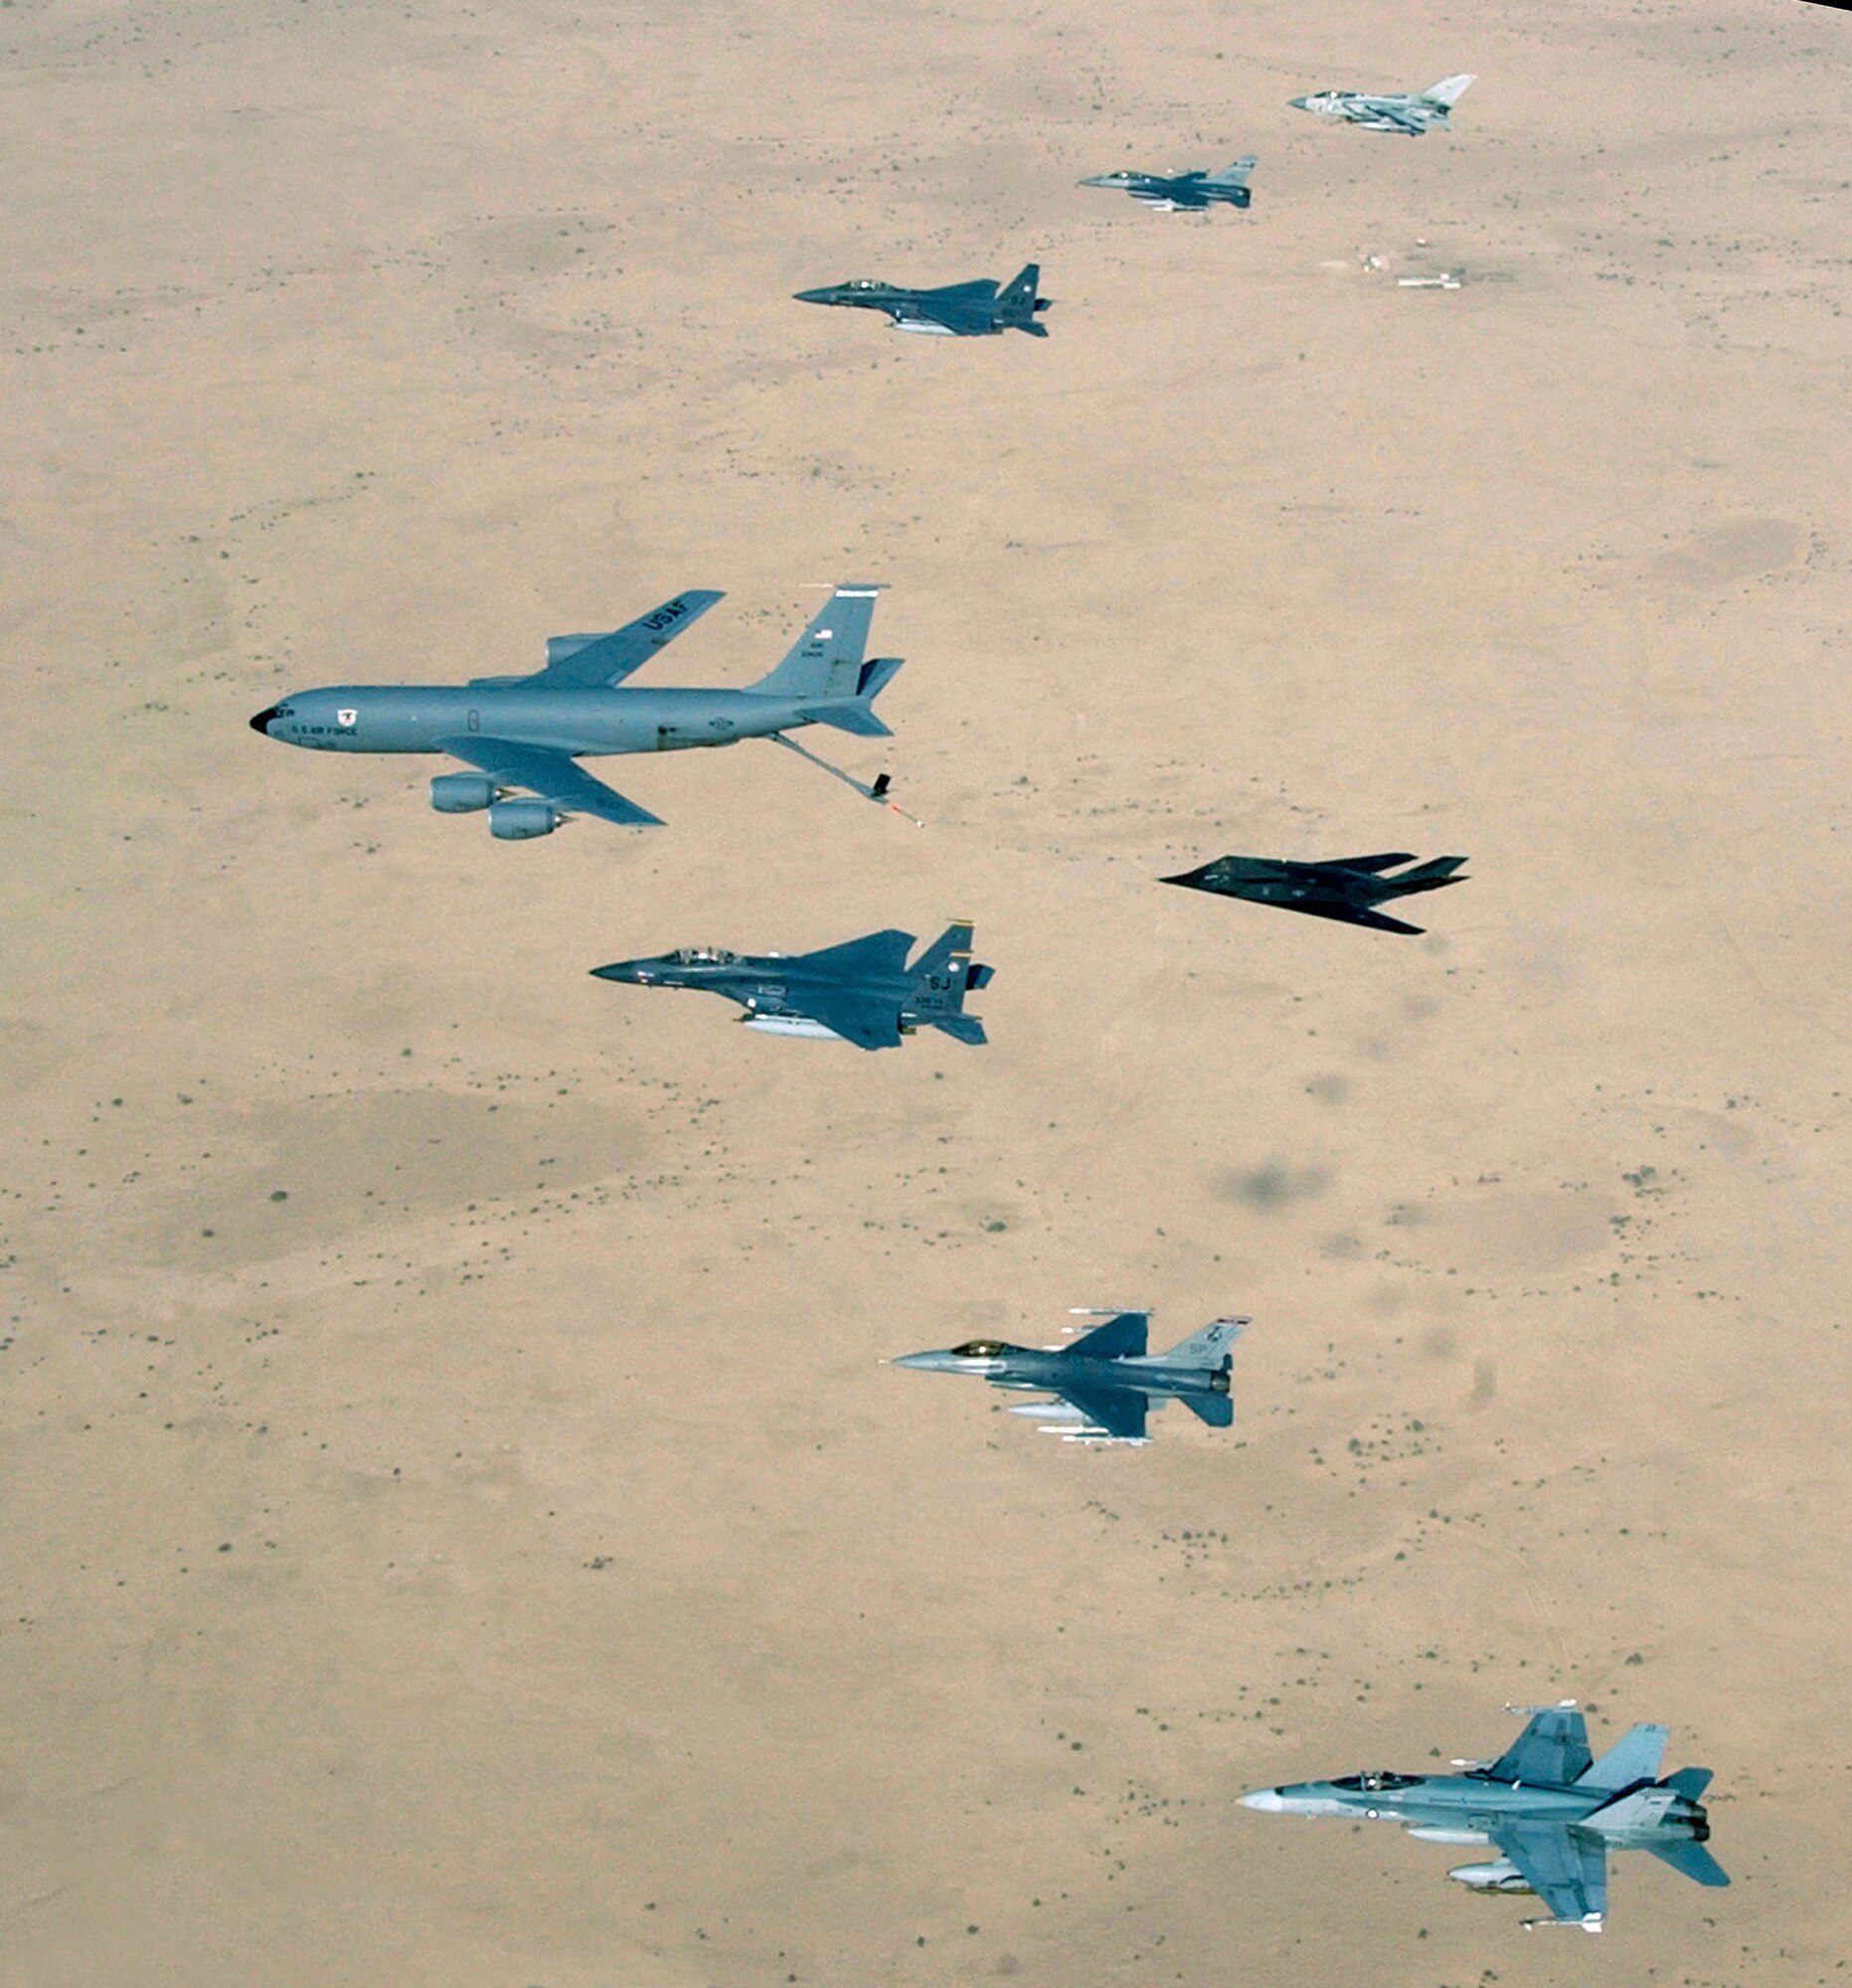 OPERATION IRAQI FREEDOM -- Aircraft of the 379th Air Expeditionary Wing and coalition counterparts stationed together in a deployed location in southwest Asia fly over the desert., April 14, 2003. Aircraft include KC-135 Stratotanker, F-15E Strike Eagle, F-117 Nighthawk, F-16CJ, British GR-4 Tornado, and Australian F/A-18 Hornet. (U.S. Air Force photo by Master Sgt. Ron Przysucha)